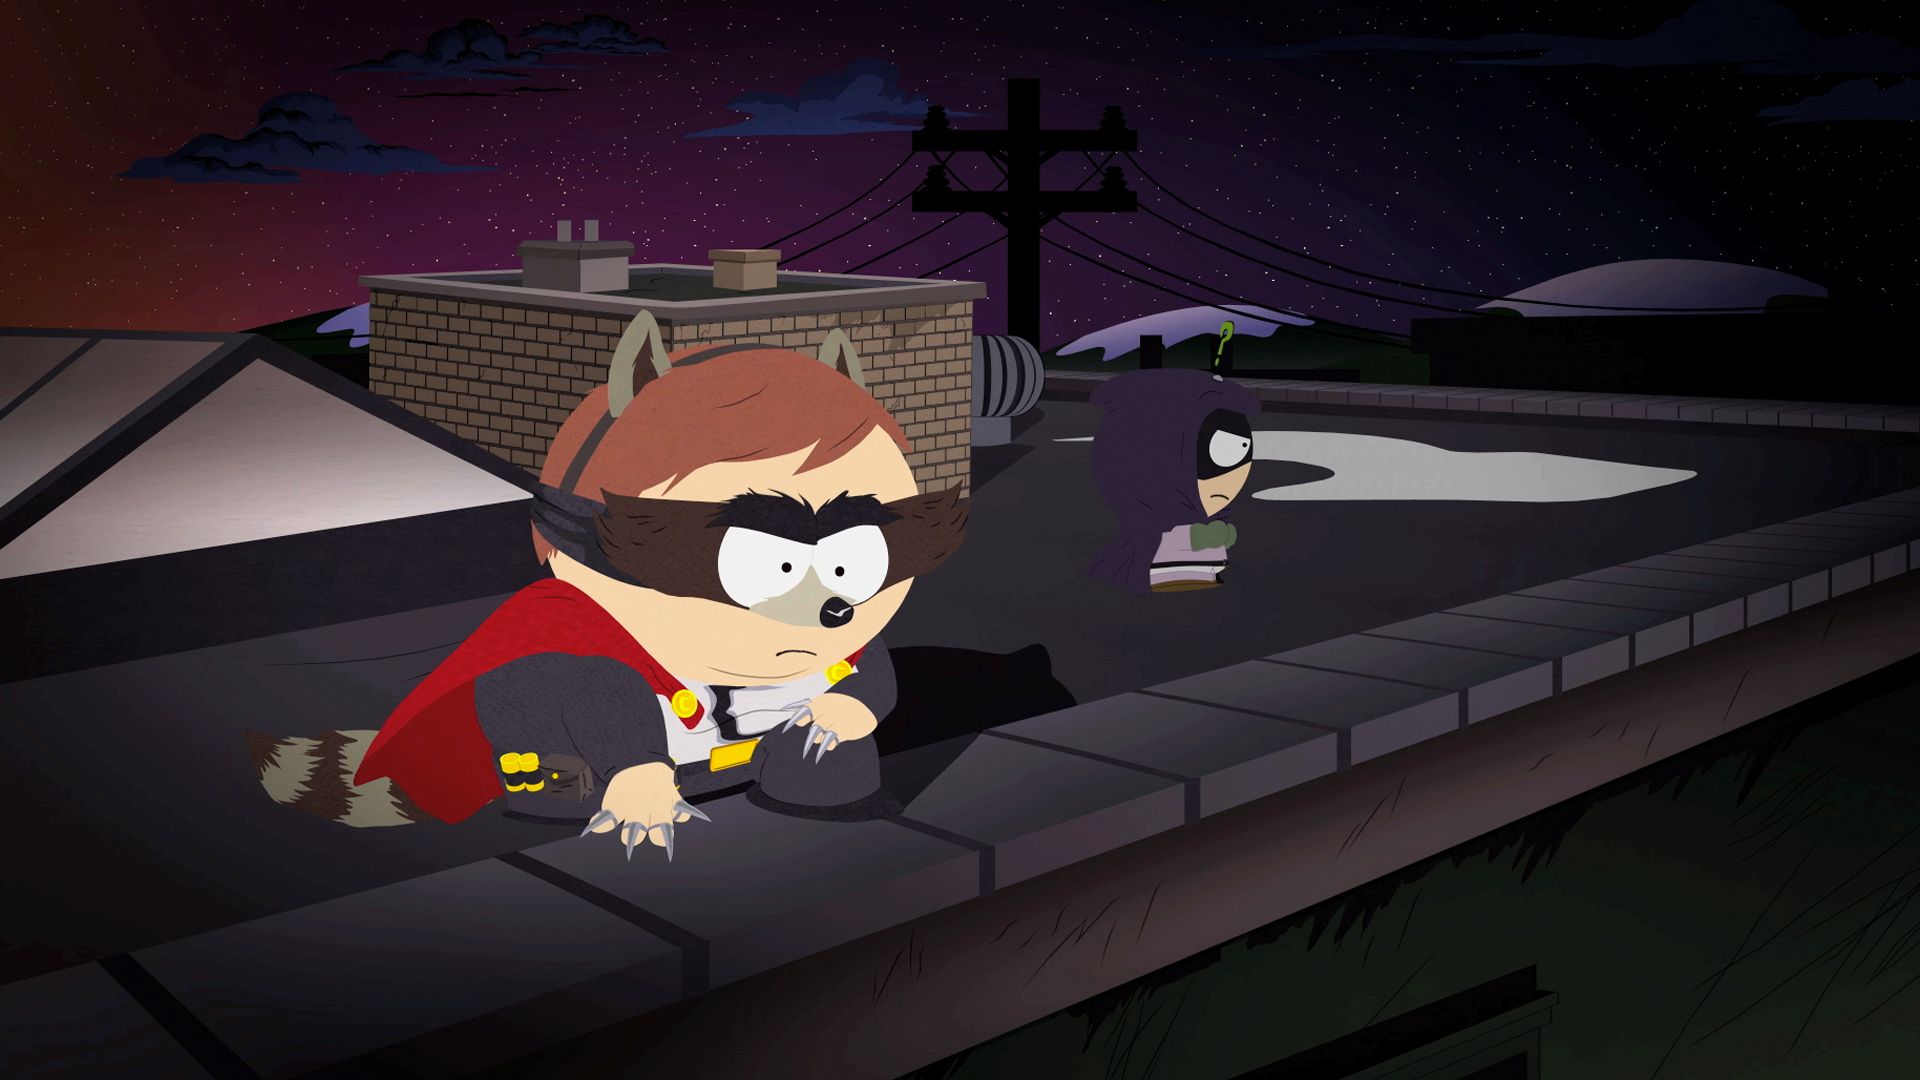 The Symbol This Town Needs - Seizoen 13 Aflevering 2 - South Park